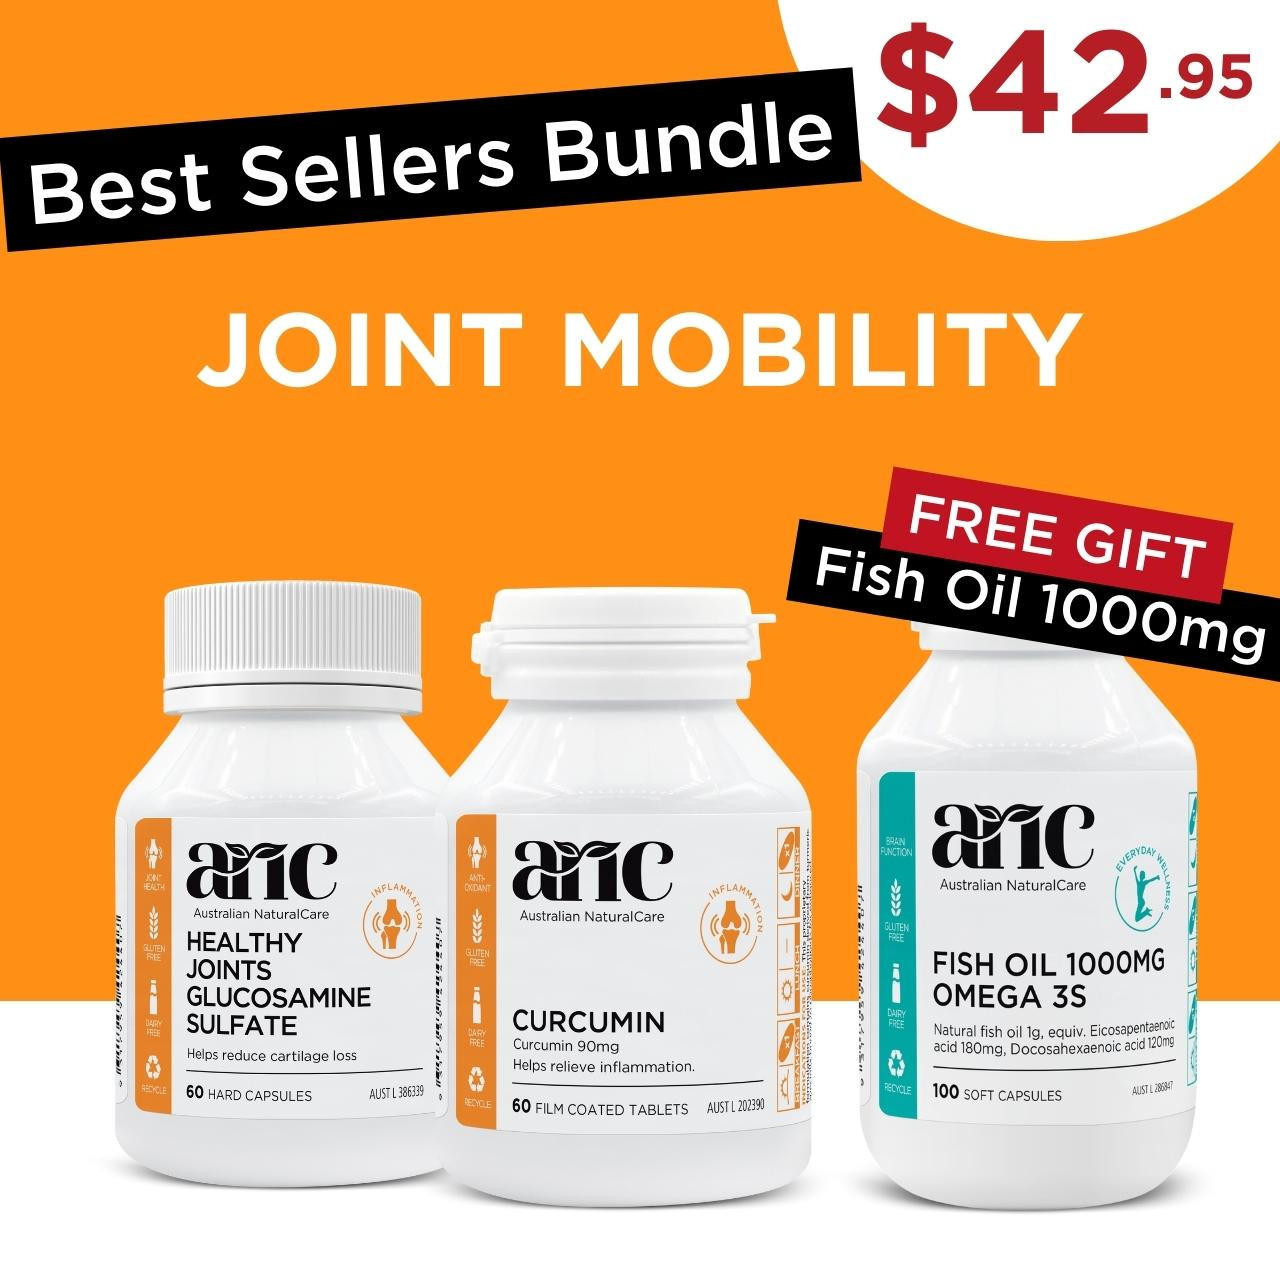 Australian NaturalCare Best Sellers Bundle Joint Mobility (Save 57%) 